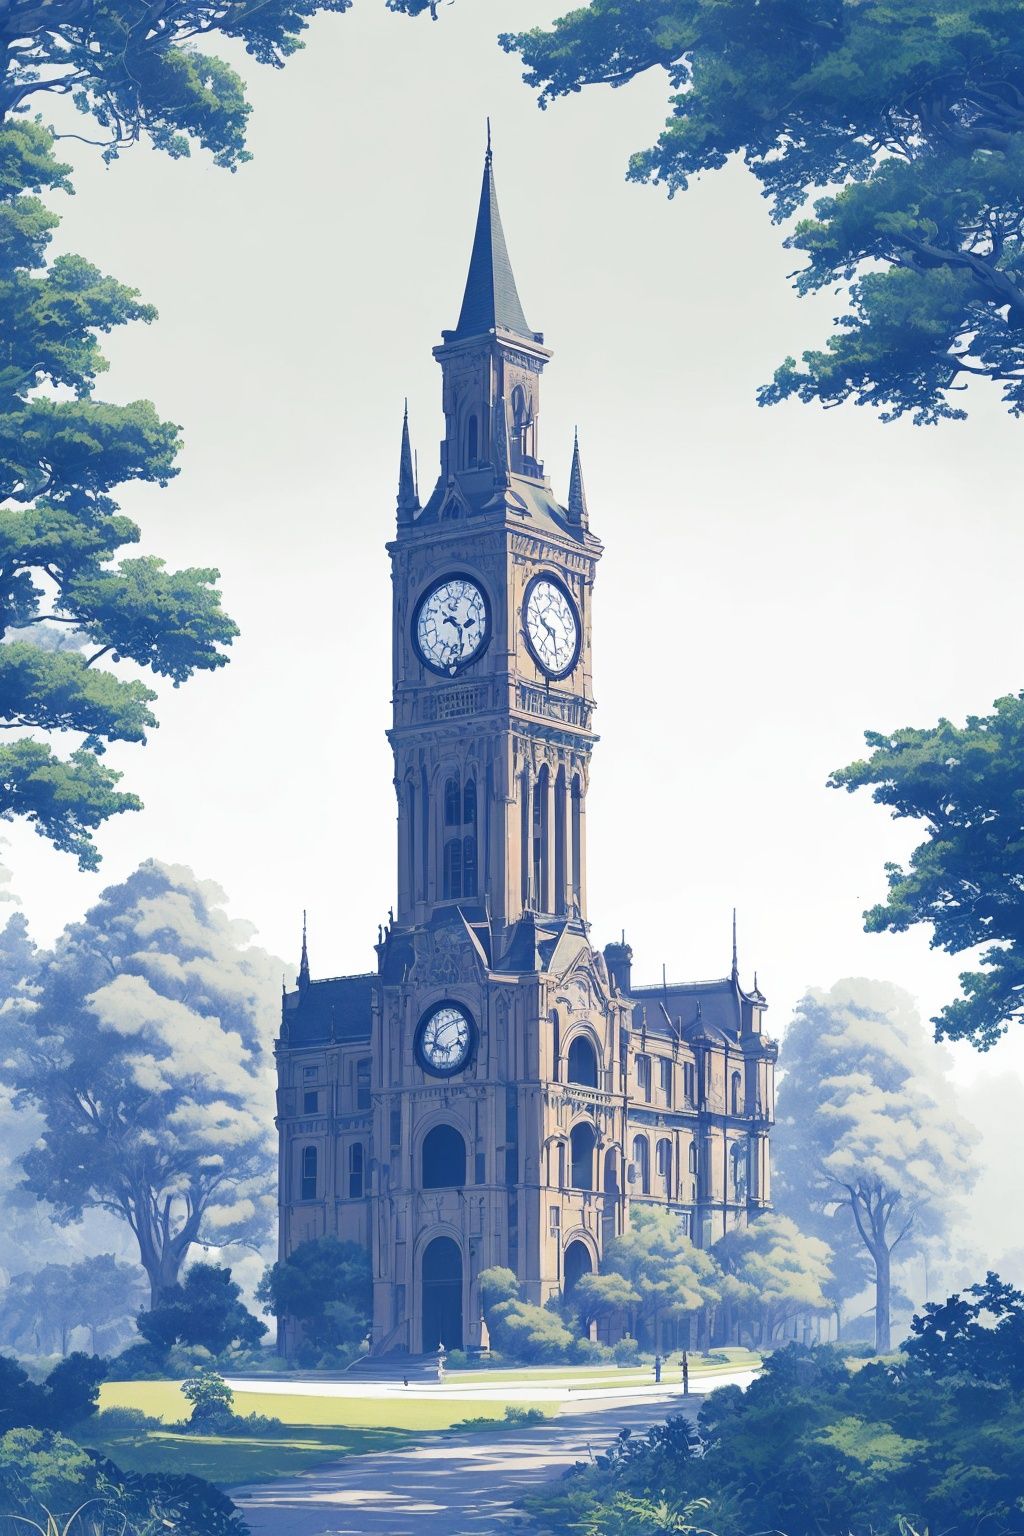 The image features a large, ornate Gothic-style building with a tall clock tower. The building is surrounded by a lush green landscape, giving it a serene and majestic appearance. The clock on the tower is prominently visible, and the tower itself is adorned with a green light, adding to the building's grandeur. The scene is further enhanced by the presence of a few trees scattered throughout the landscape, providing a sense of depth and natural beauty to the image.